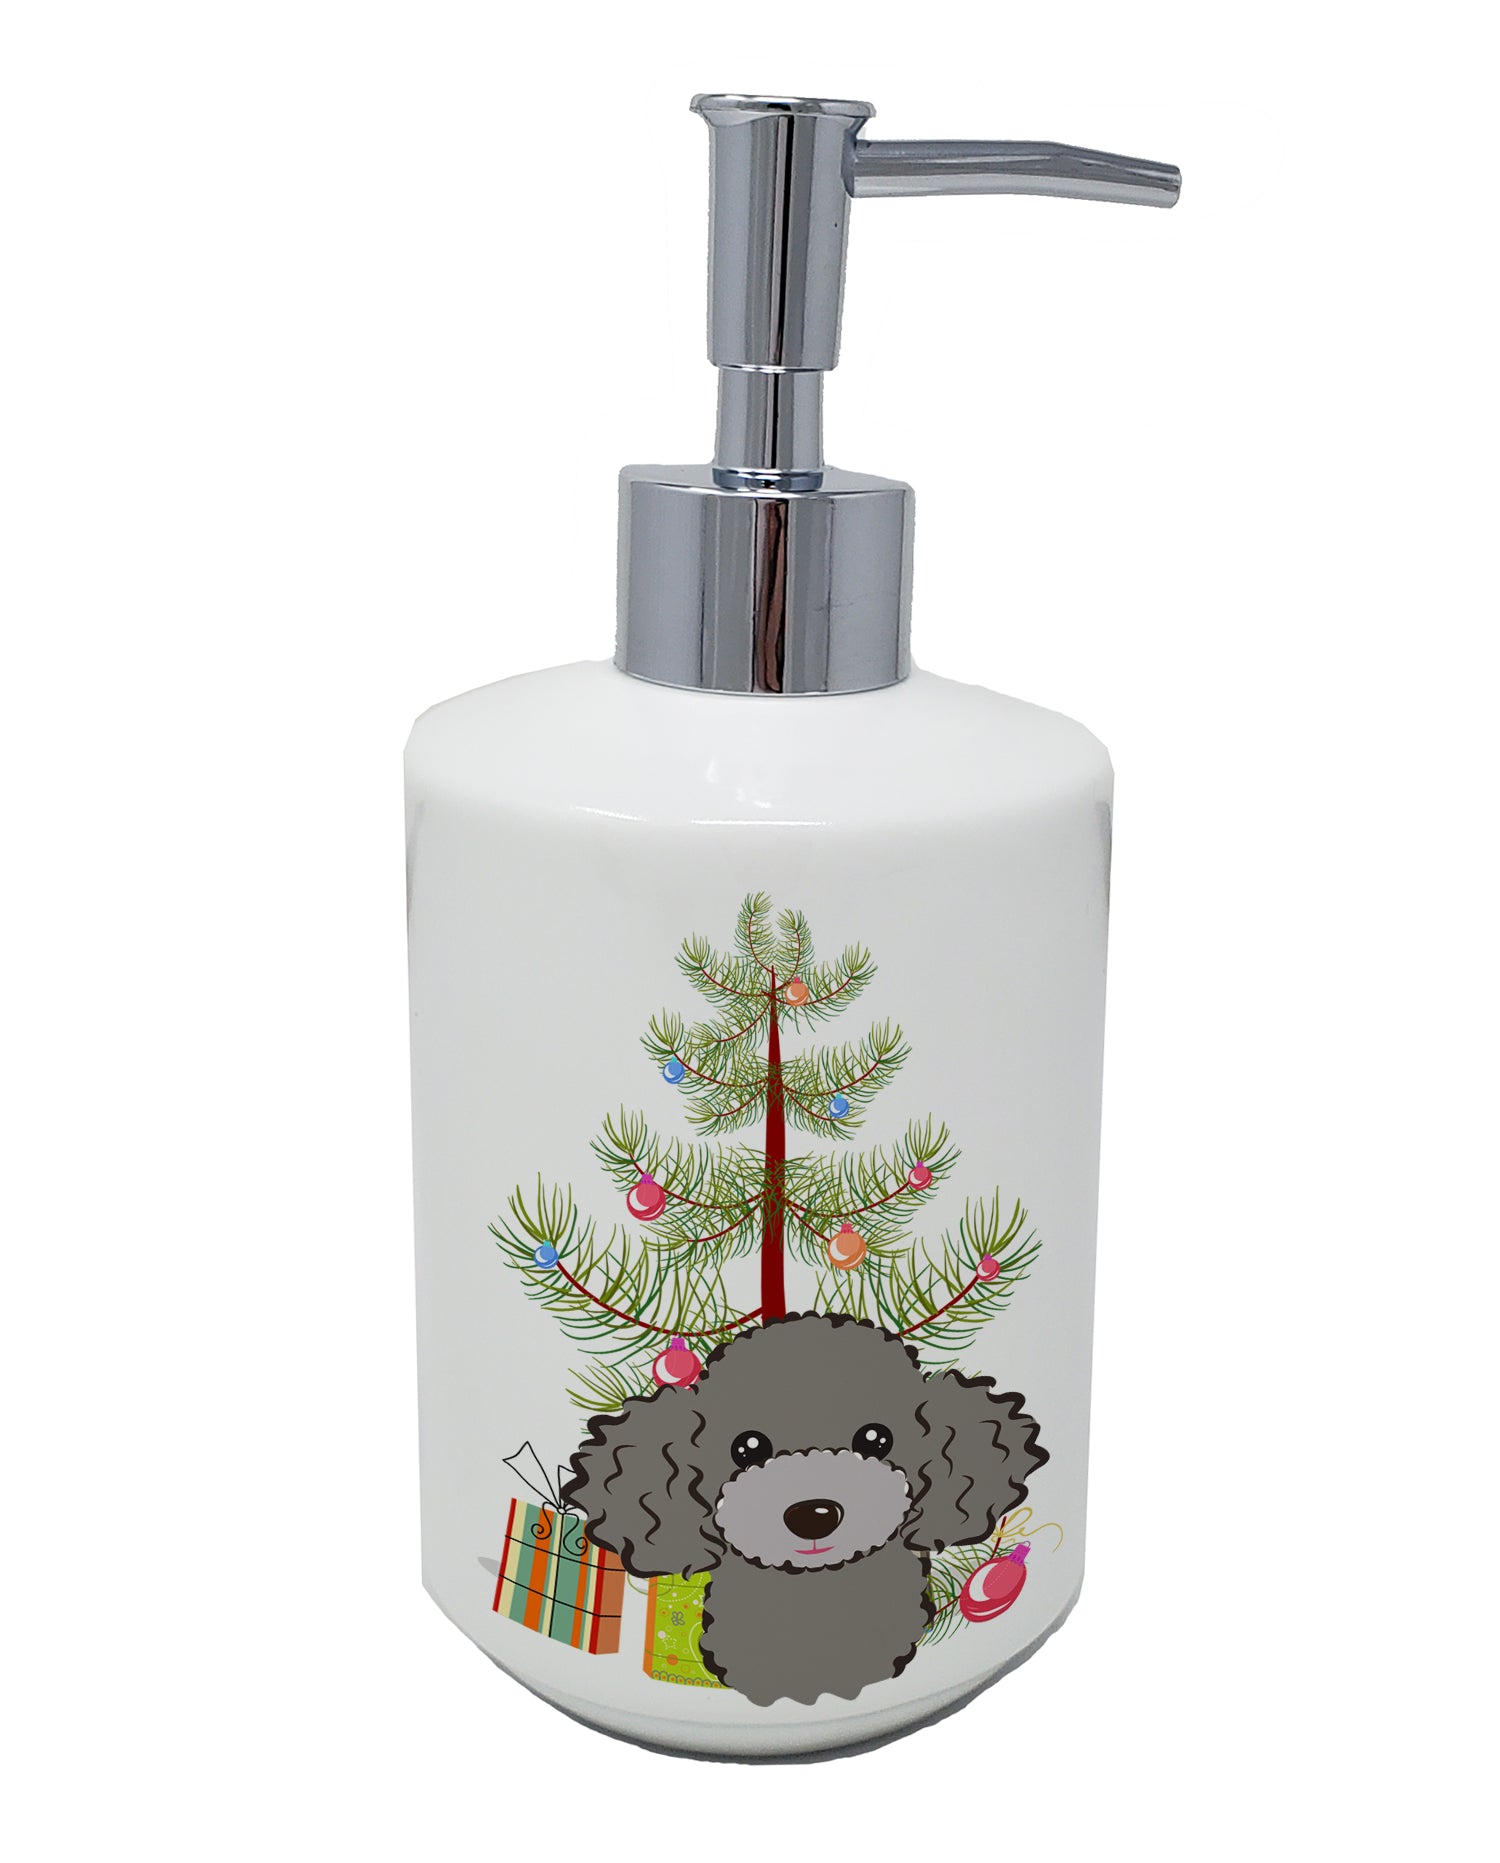 Buy this Christmas Tree and Silver Gray Poodle Ceramic Soap Dispenser